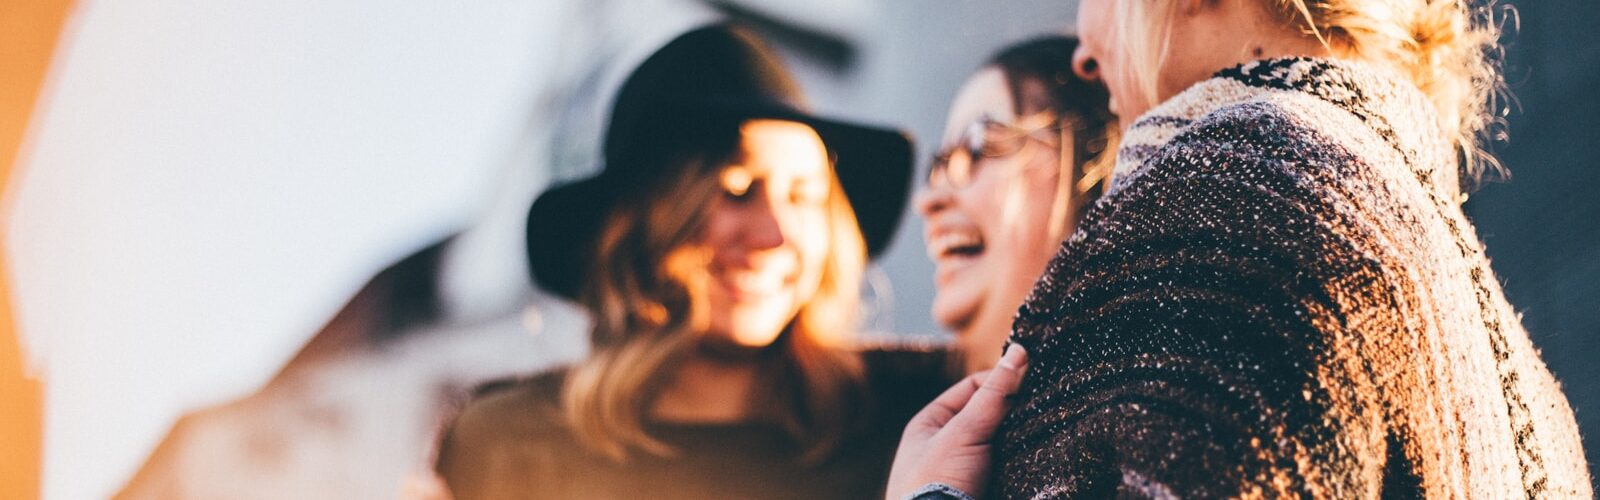 The Social Media Advantage in Creating Friendships